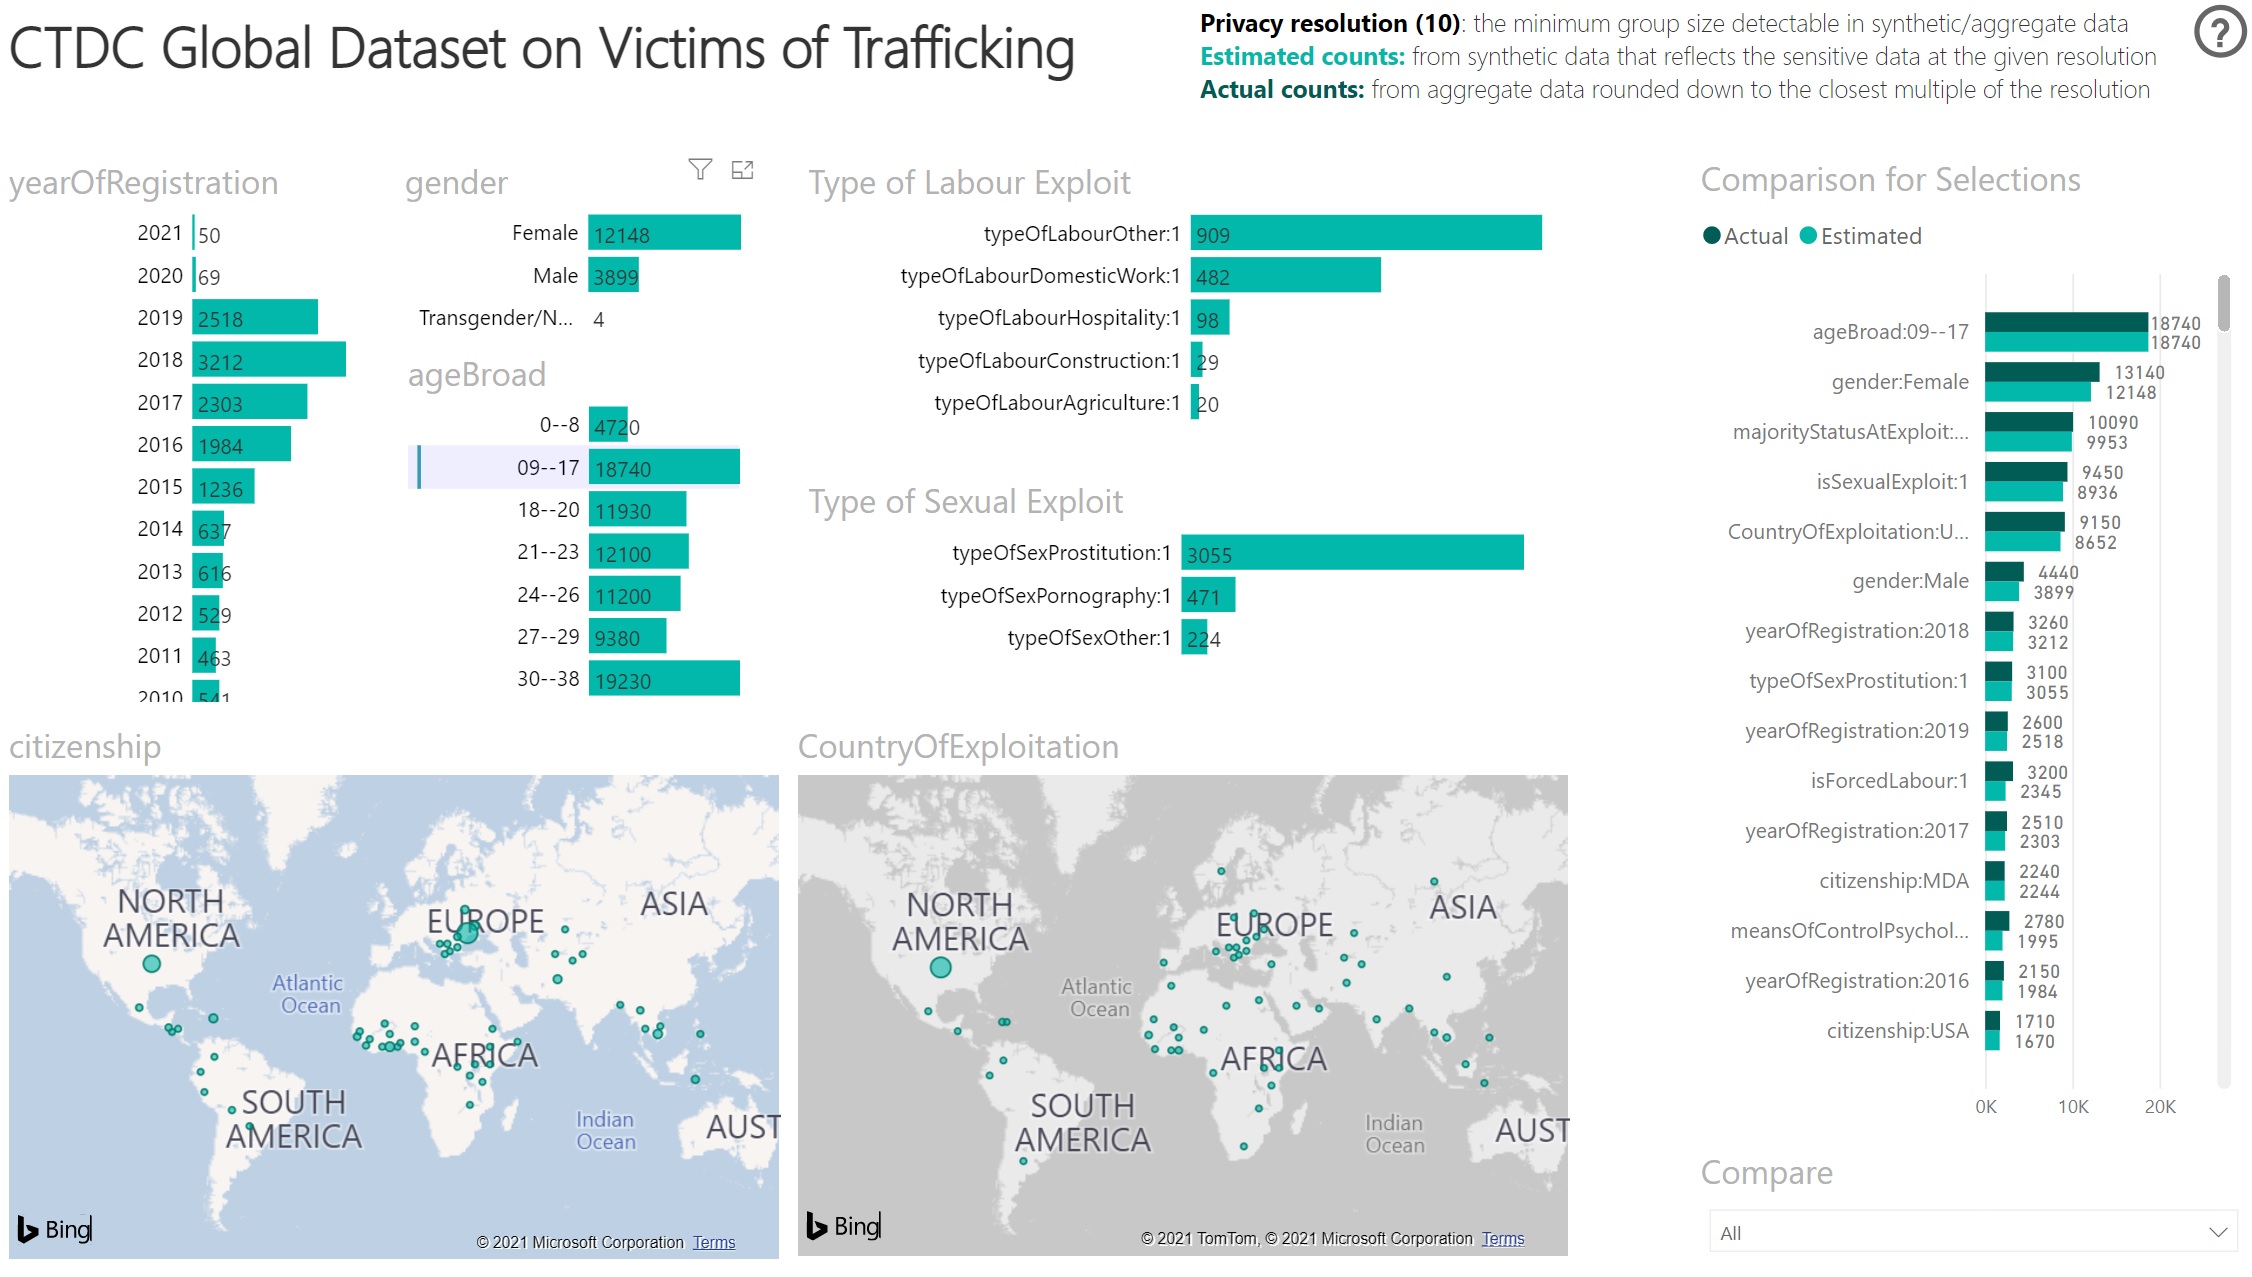 Interactive dashboard in Power BI showing visual representations of the counts of human trafficking cases with different attributes: year of registration, gender, age, type of labor exploitation, type of sexual exploitation, citizenship, and country of exploitation. Light green frequency bars to the left represent counts of attributes dynamically generated by Power BI. These light green frequency bars are repeated on the right, paired with dark green frequency bars showing actual counts for comparison. The age range 9–17 is selected, corresponding to 18,740 estimated cases. This is identical to the actual count shown on the right. The most frequent type of labor exploitation associated with this age range is “other.”